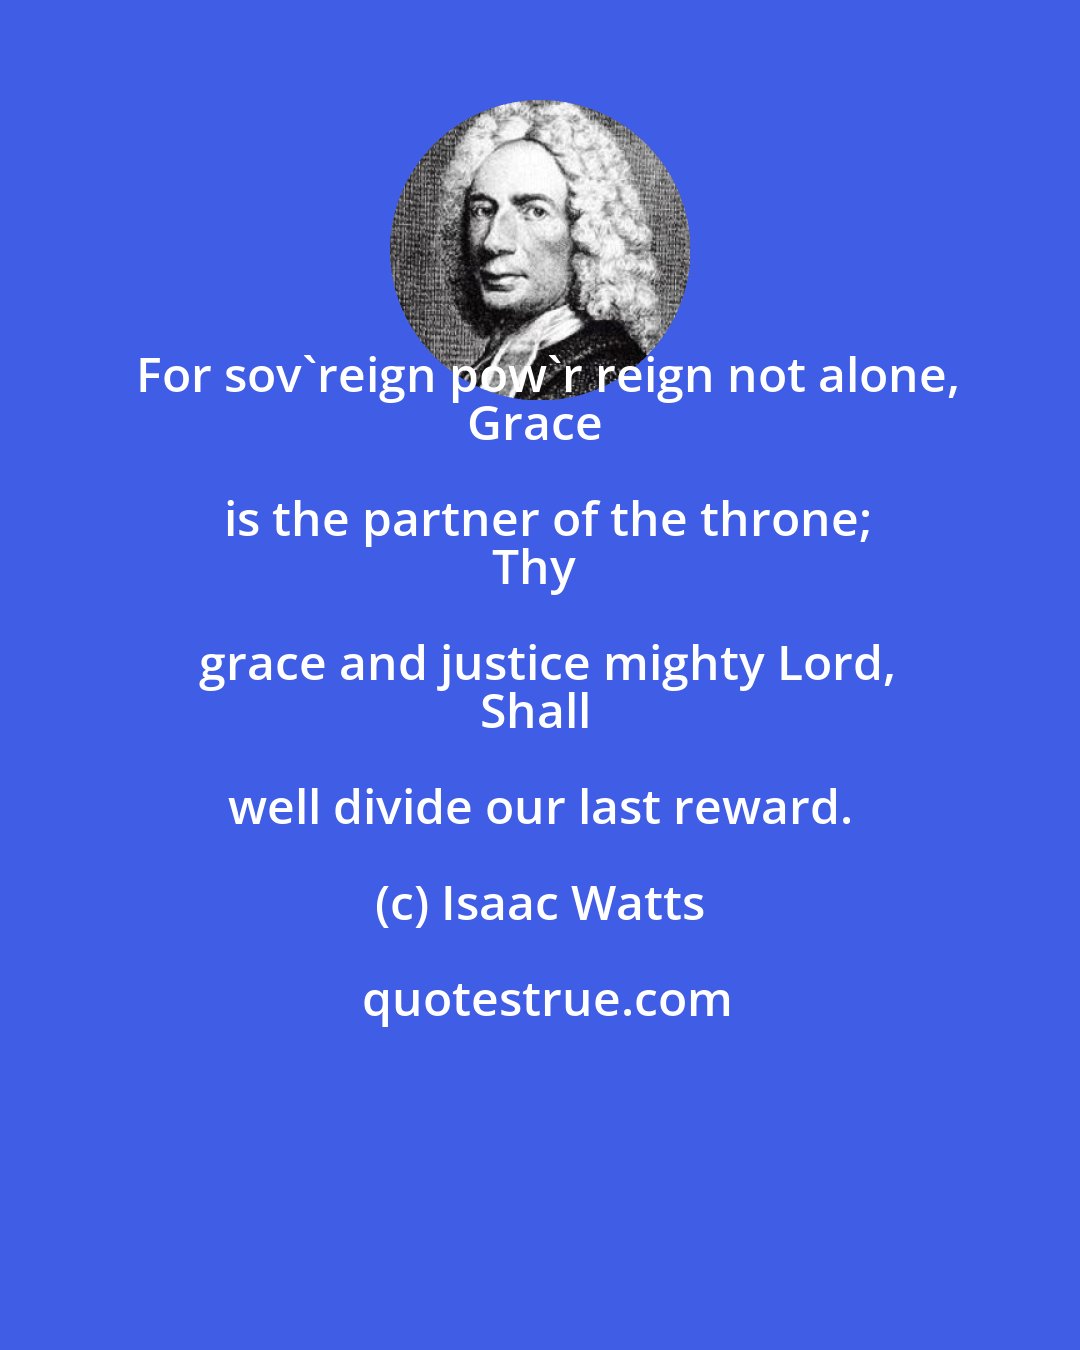 Isaac Watts: For sov'reign pow'r reign not alone,
Grace is the partner of the throne;
Thy grace and justice mighty Lord,
Shall well divide our last reward.